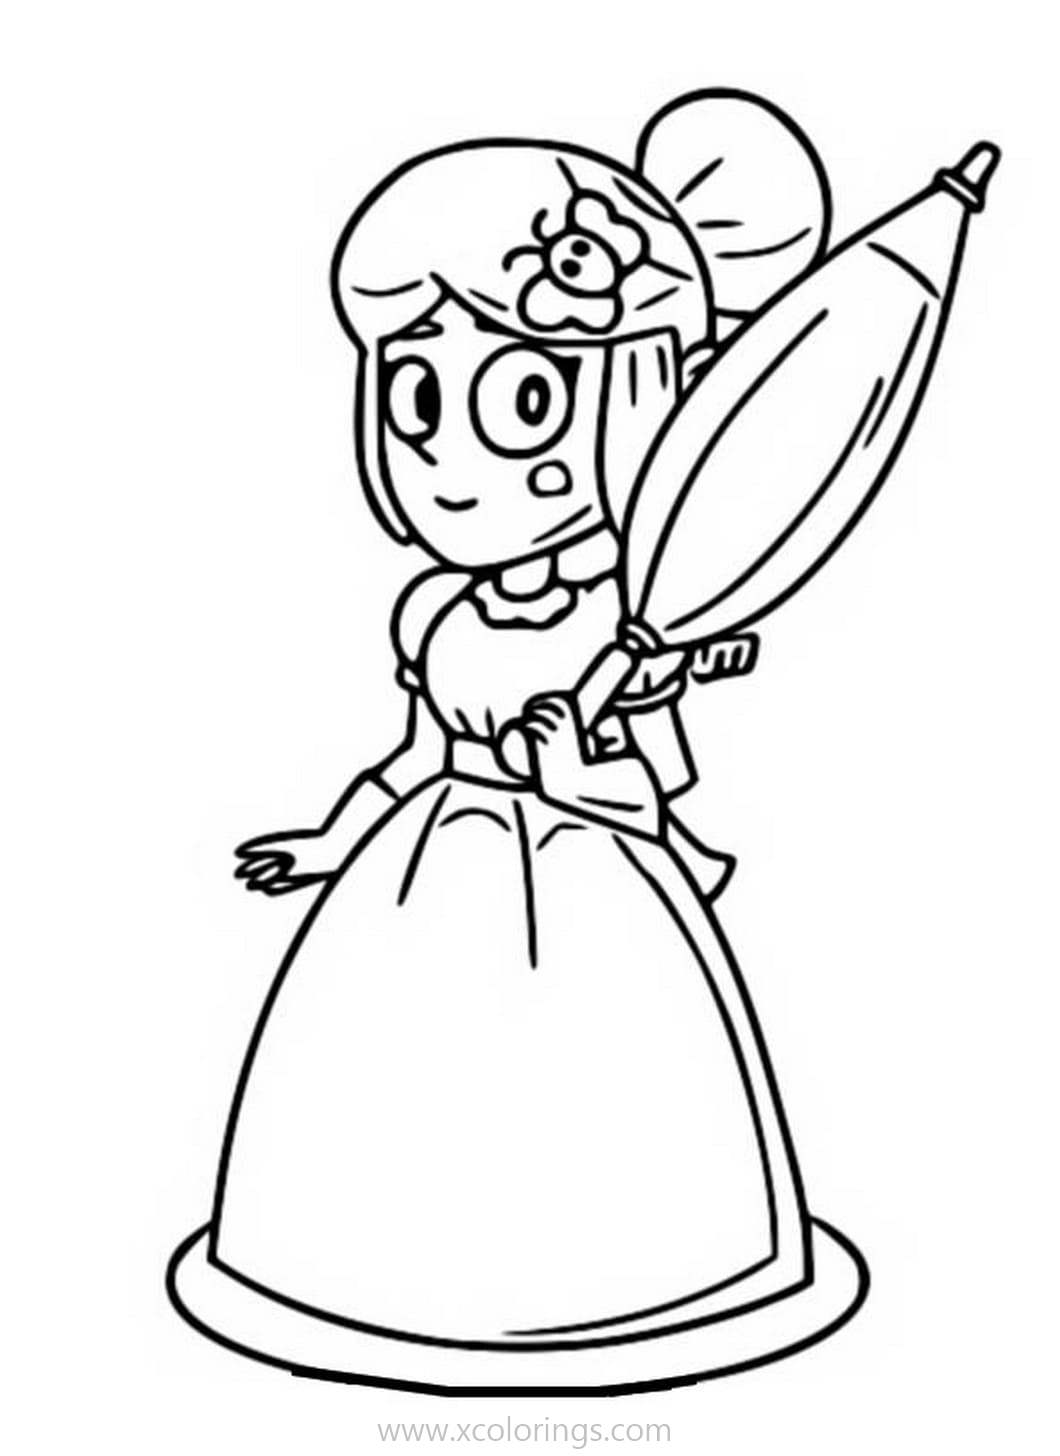 Free Brawl Stars Coloring Pages Piper with Umbrella printable